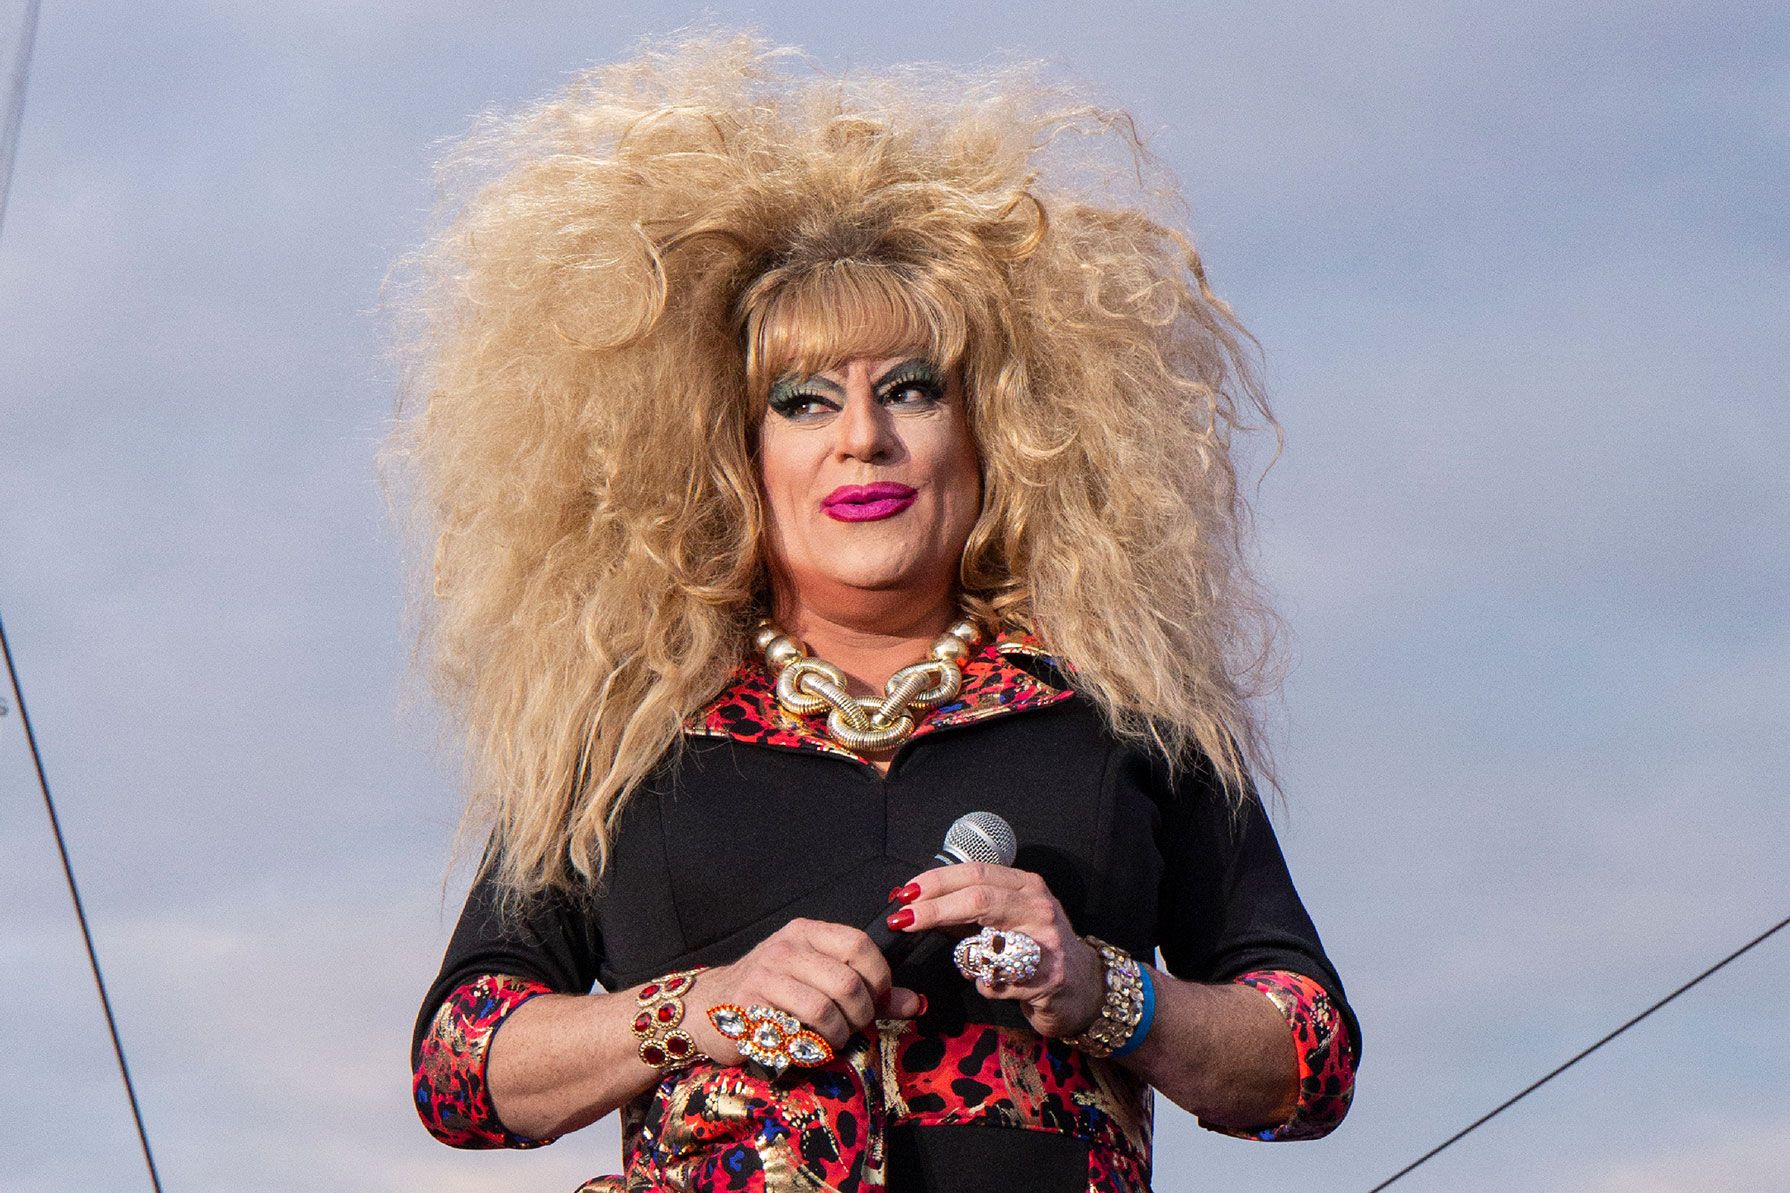 Heklina, Influential San Franciso Drag Queen, Dead at 55